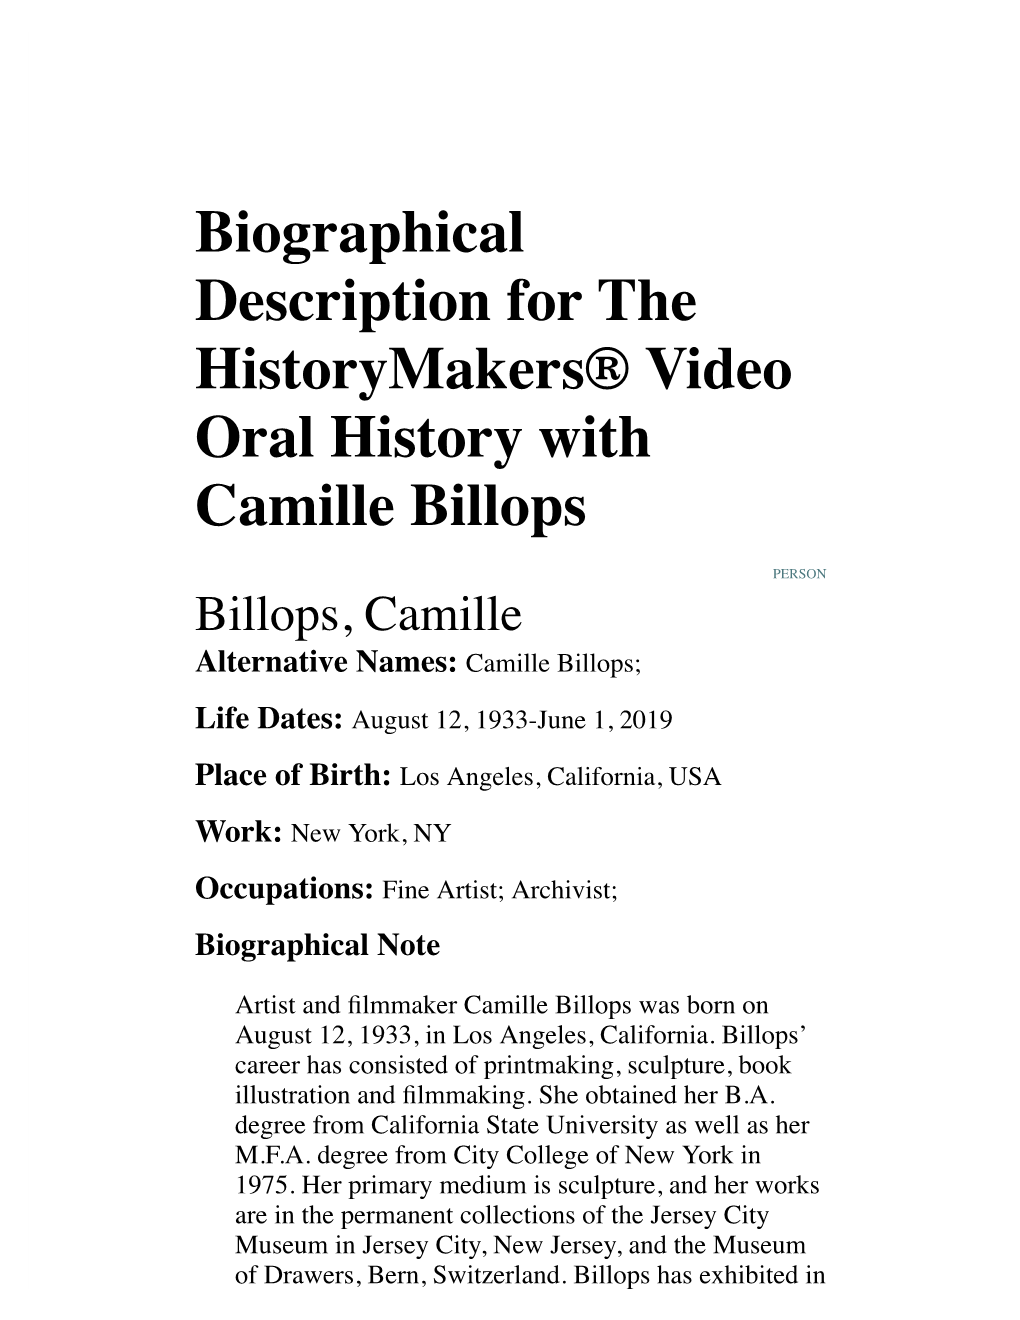 Biographical Description for the Historymakers® Video Oral History with Camille Billops